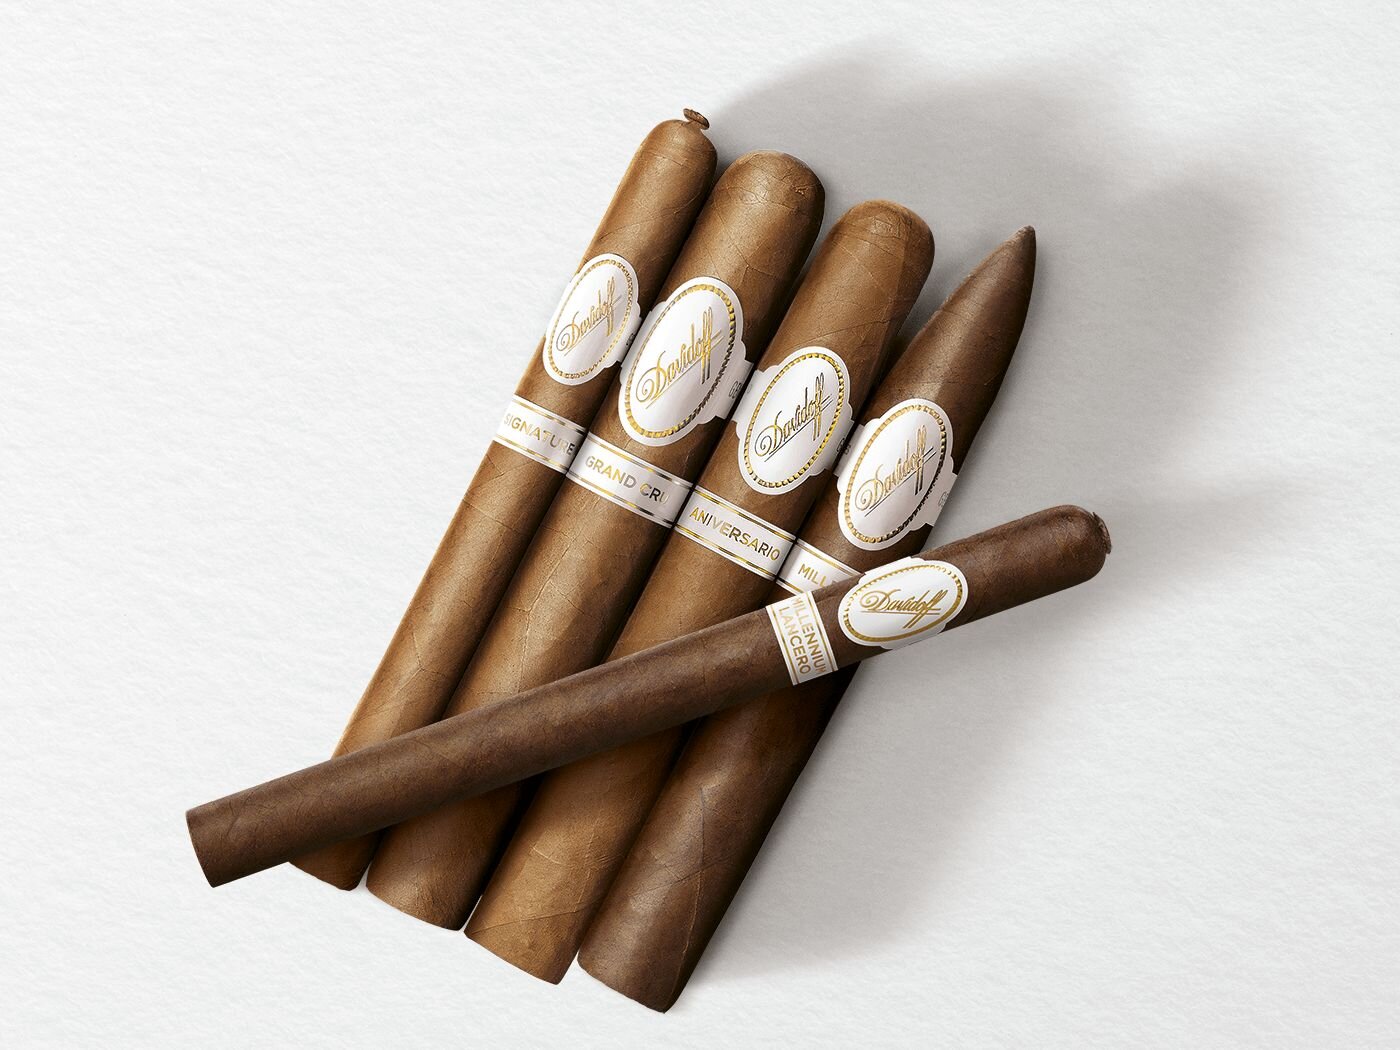 4 cigars of the Davidoff White Band Collection lines Signature, Grand Cru, Millennium and Aniversario with one Davidoff Millennium Lancero Limited Edition Collection cigar placed across on top of them.